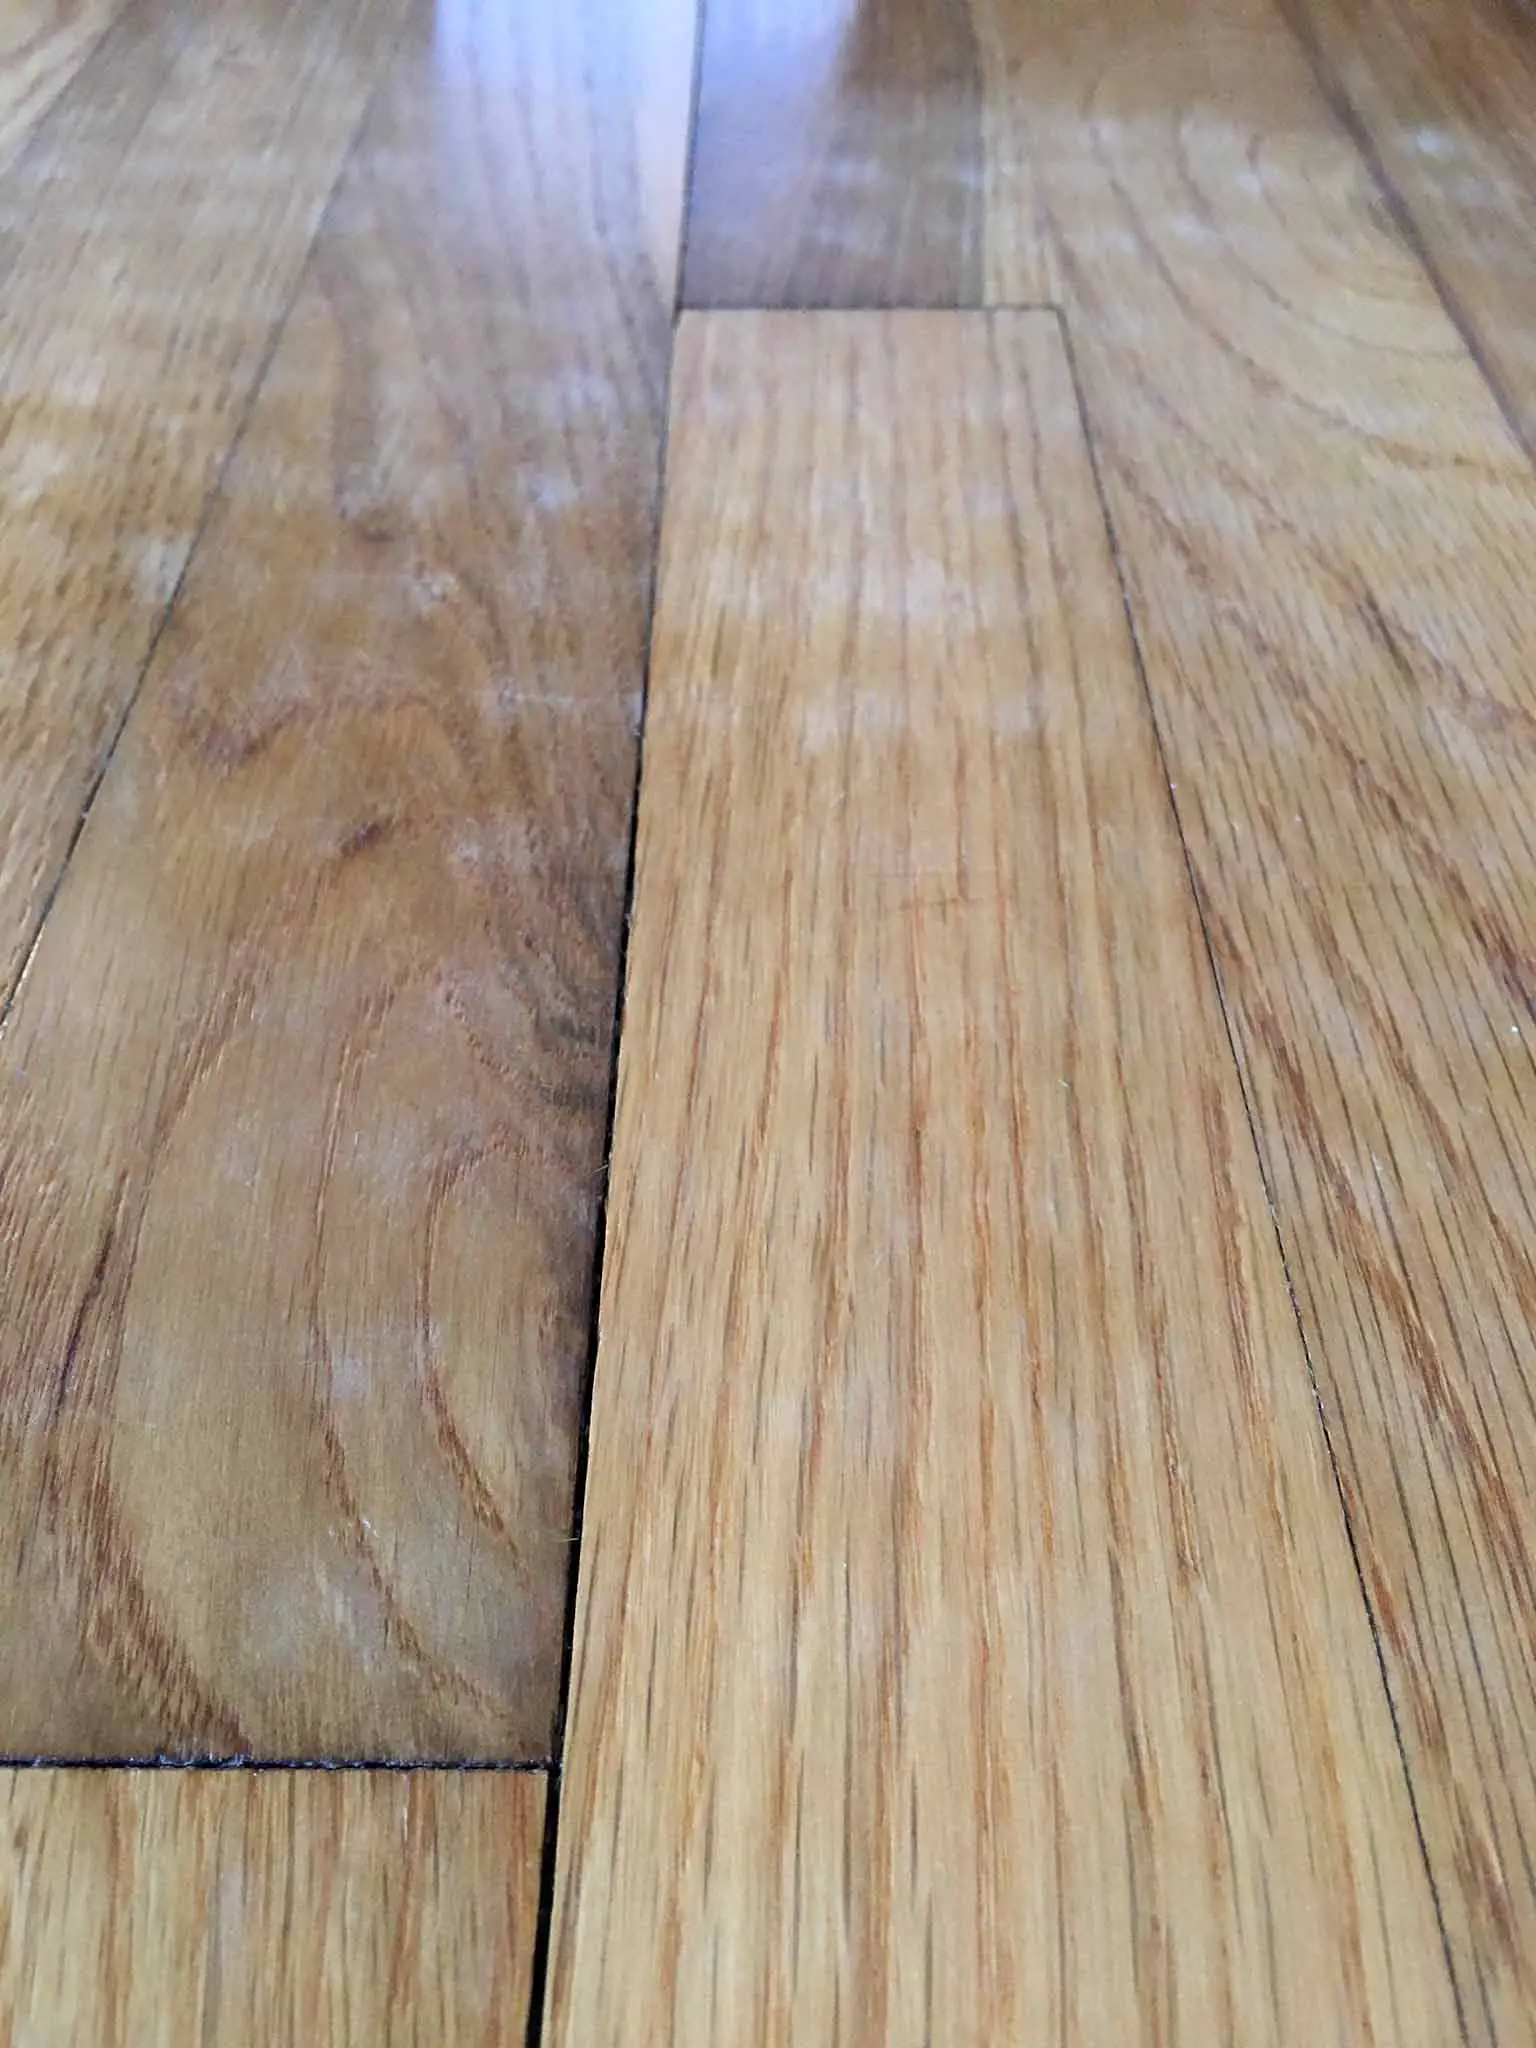 How I Wrecked My Hardwood Floors And, How To Remove Rubber Carpet Backing From Hardwood Floor